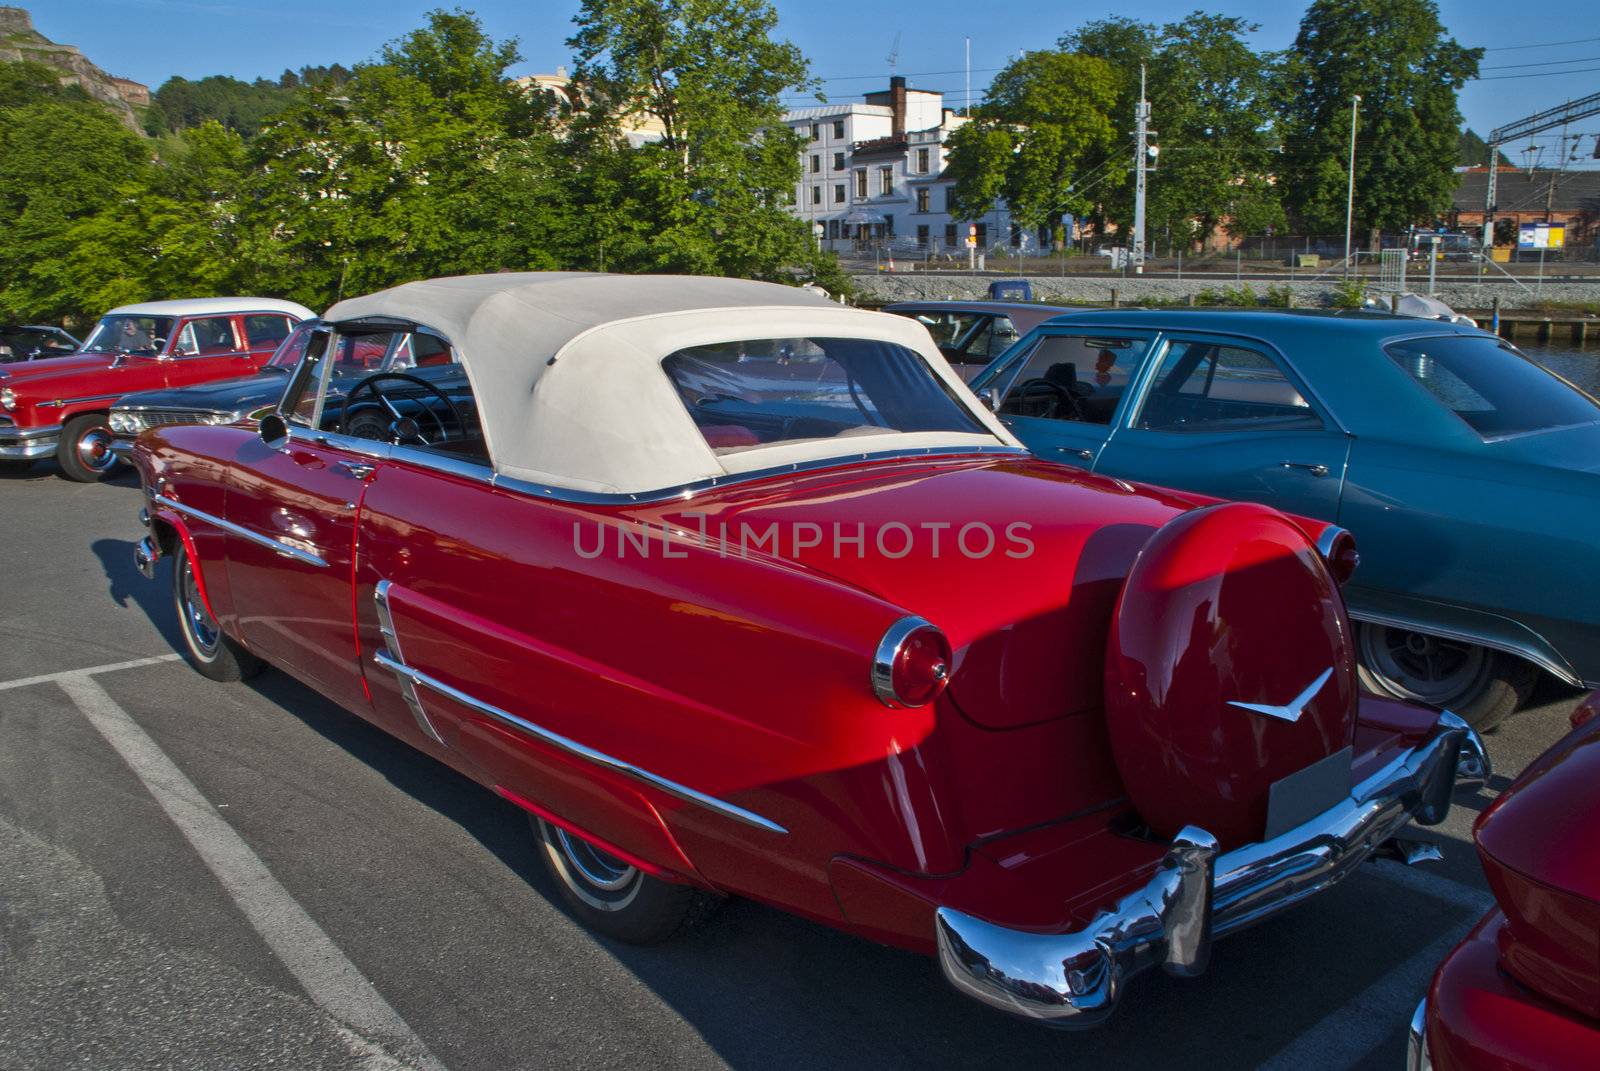 Each Wednesday during the summer months there is show of American vintage cars in the center of Halden city.